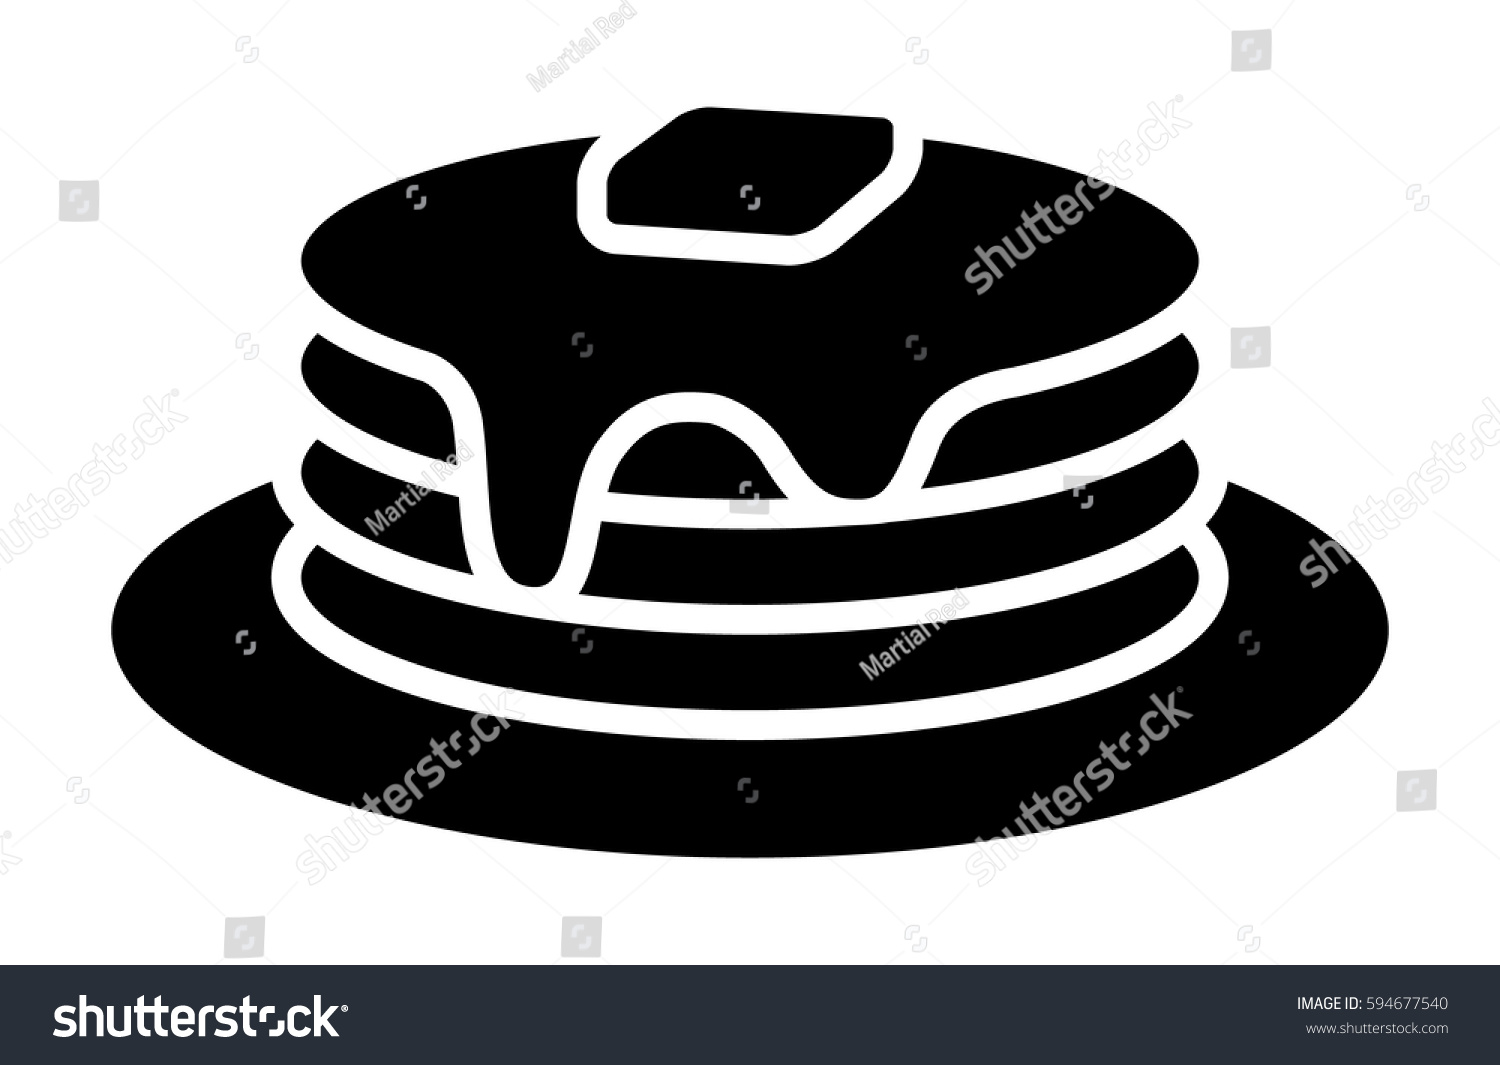 SVG of Breakfast pancakes with syrup and butter on a plate flat vector icon for food apps and websites svg